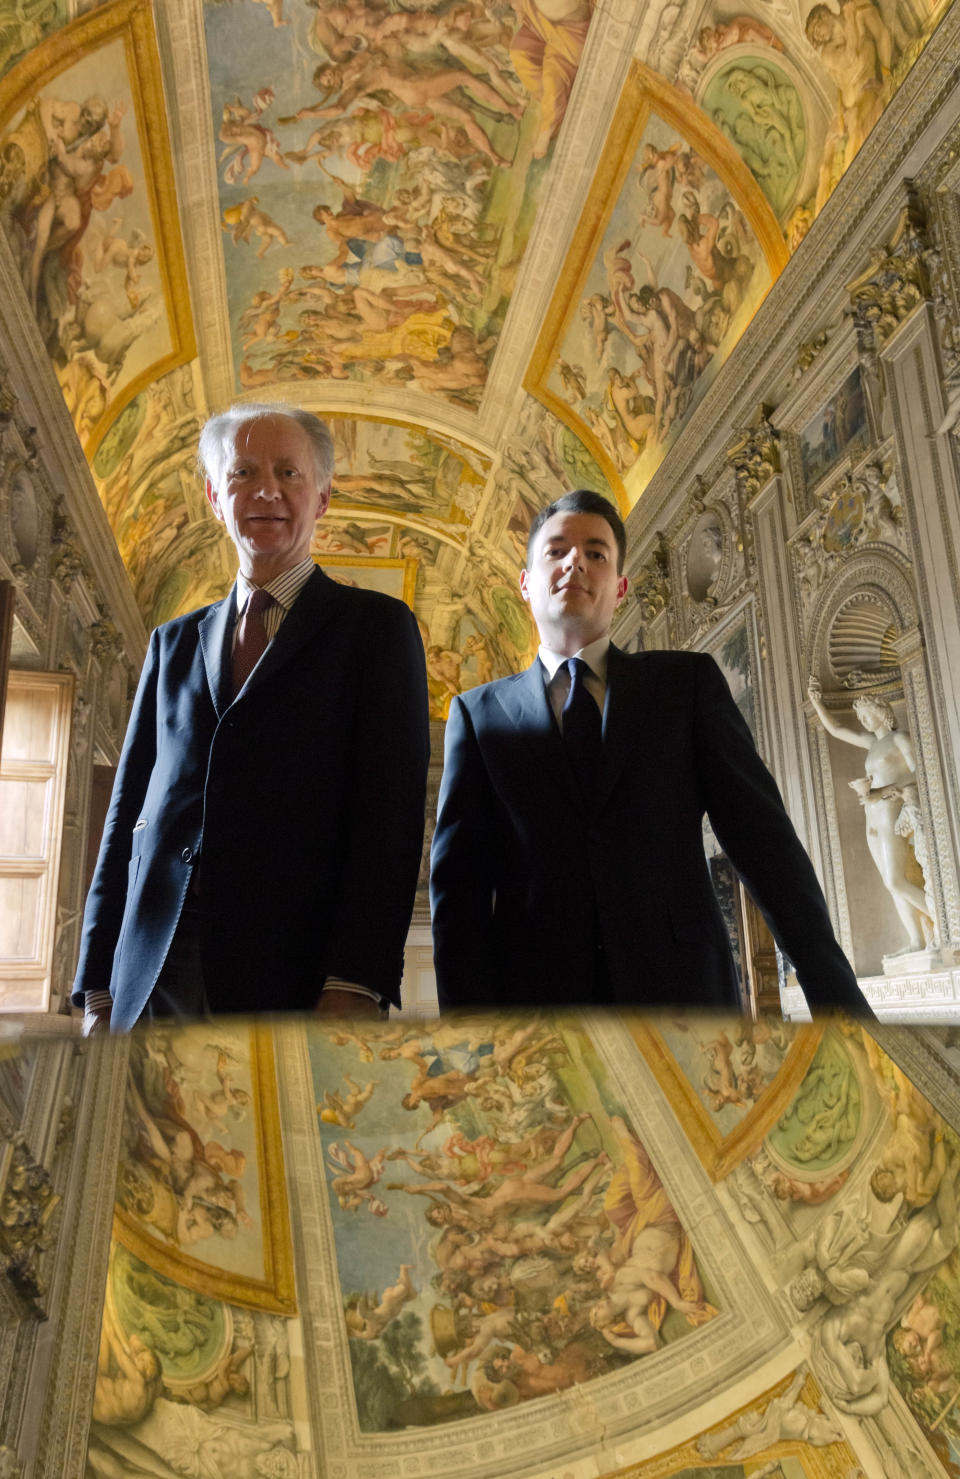 President of World Monuments Fund Europe, Bertrand du Vignaud, left, poses with Embassy Counsellor Erkki Maillard in front of a mirror strategically positioned to allow visitors to admire the splendour of the frescoed ceilings of the Carracci Gallery in the Farnese Palace that hosts the French Embassy in Rome, Wednesday, Feb. 26, 2014. The World Monuments Fund Europe will allocate some 800 million Euros for the restoration of the about 140 square meters of 16th century frescoes by Annibale and Agostino Carracci that will begin mid March and are expected to be completed in 2015. (AP Photo/Domenico Stinellis)